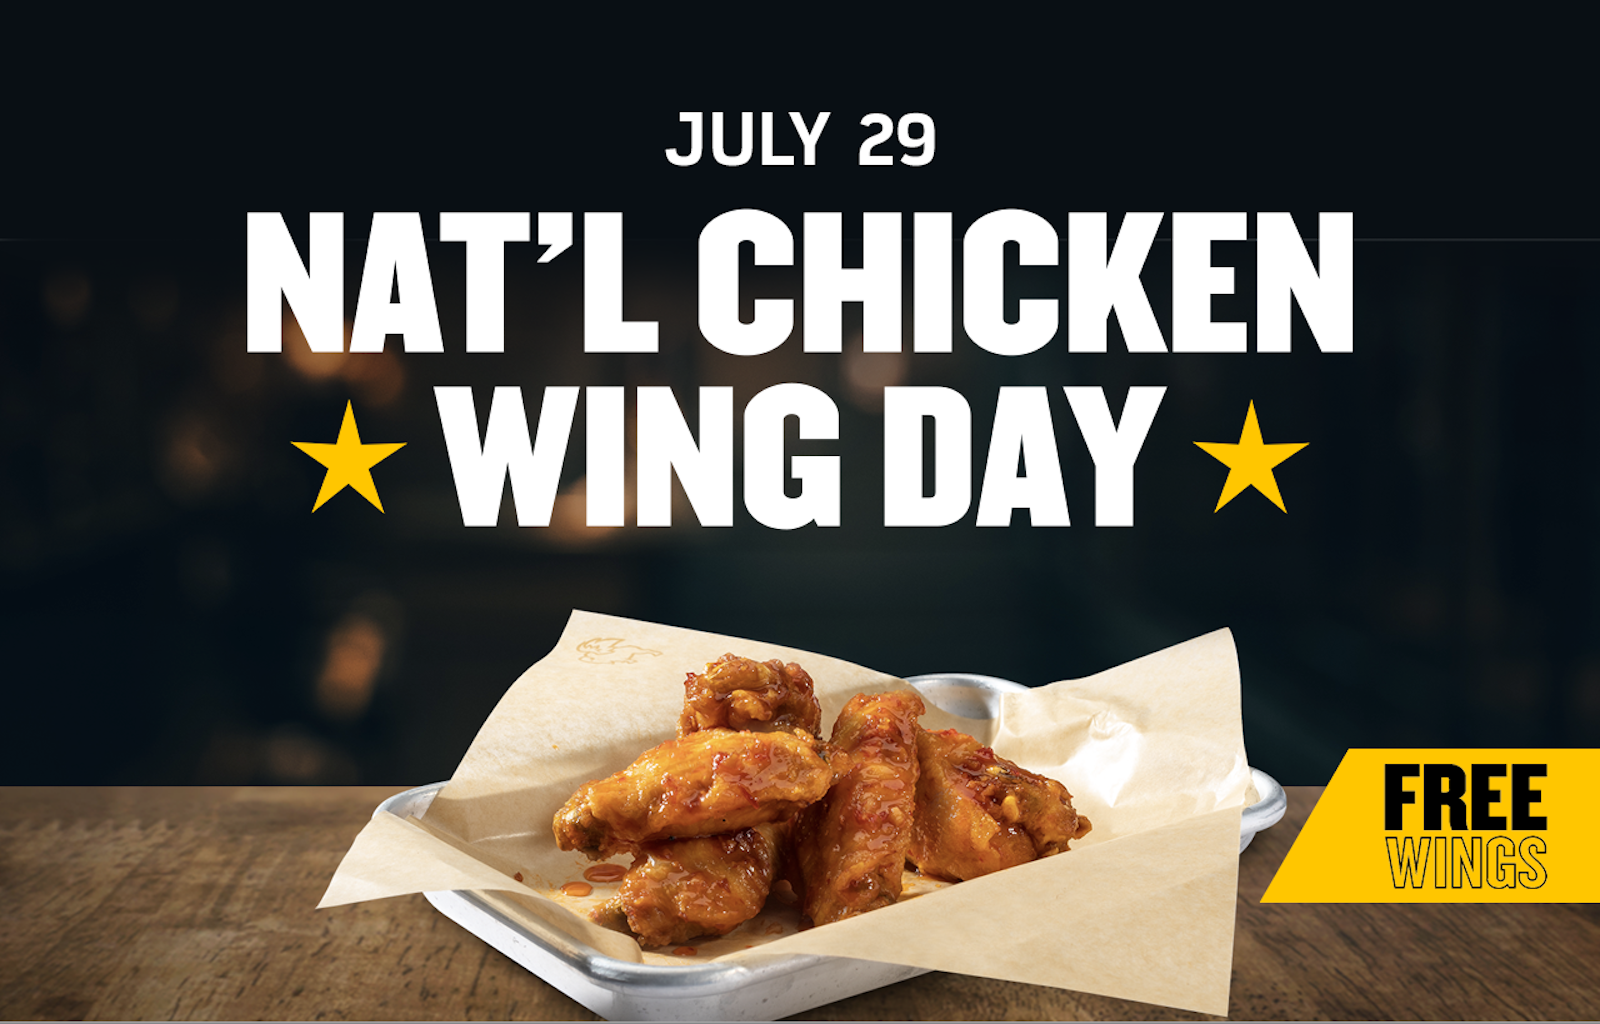 Fans Can Score Free Wings Wing Purchase at BWW on National